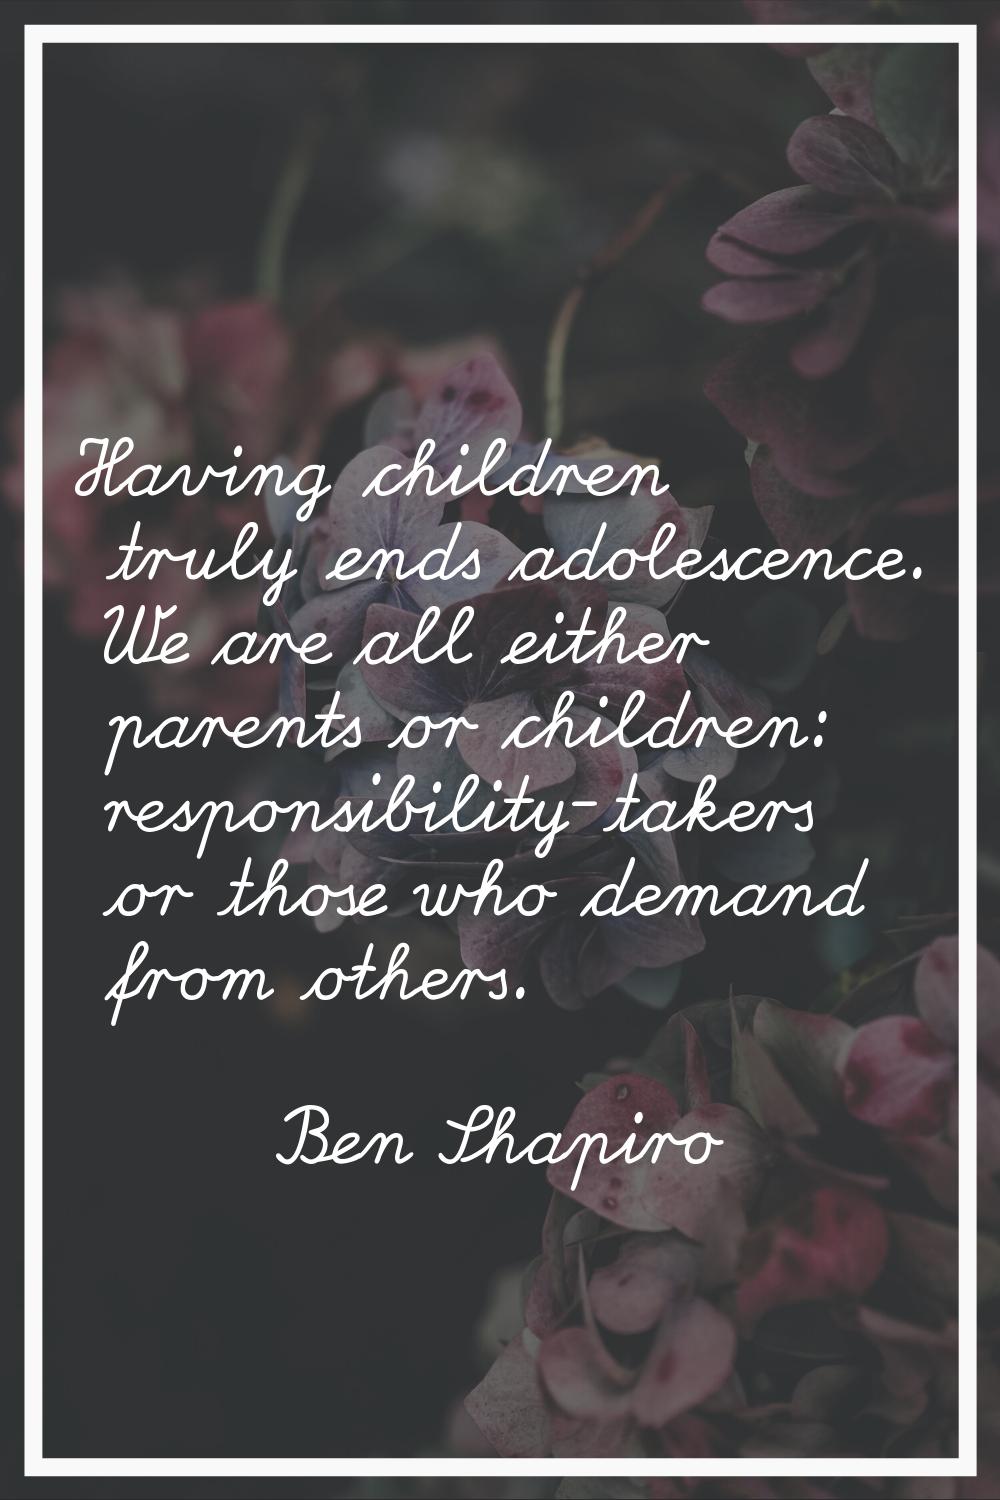 Having children truly ends adolescence. We are all either parents or children: responsibility-taker